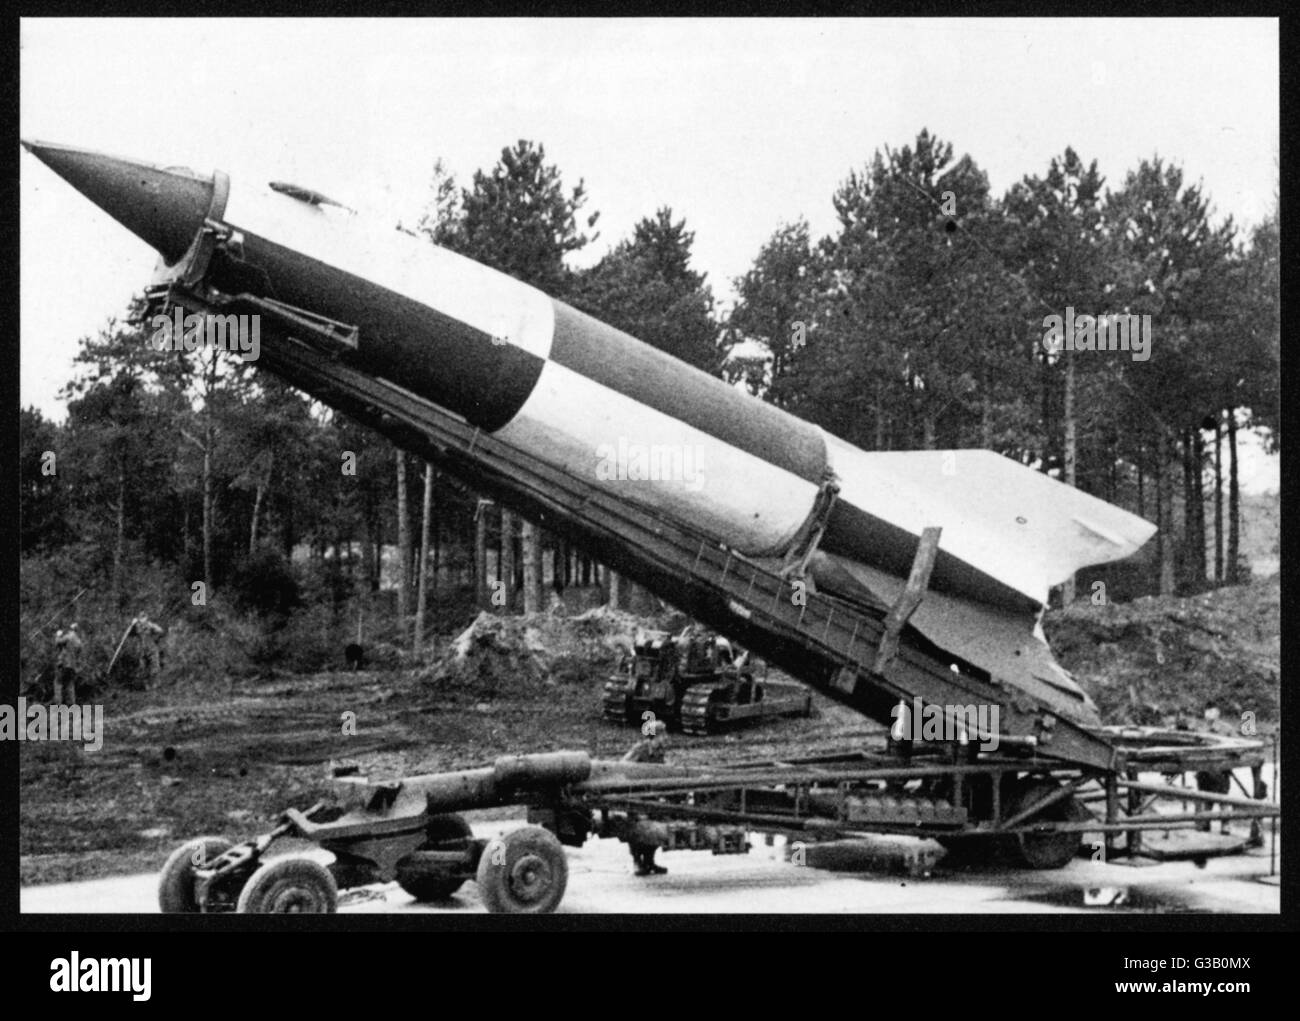 a-v2-rocket-on-the-launch-pad-more-elaborate-than-the-v1-these-were-G3B0MX.jpg